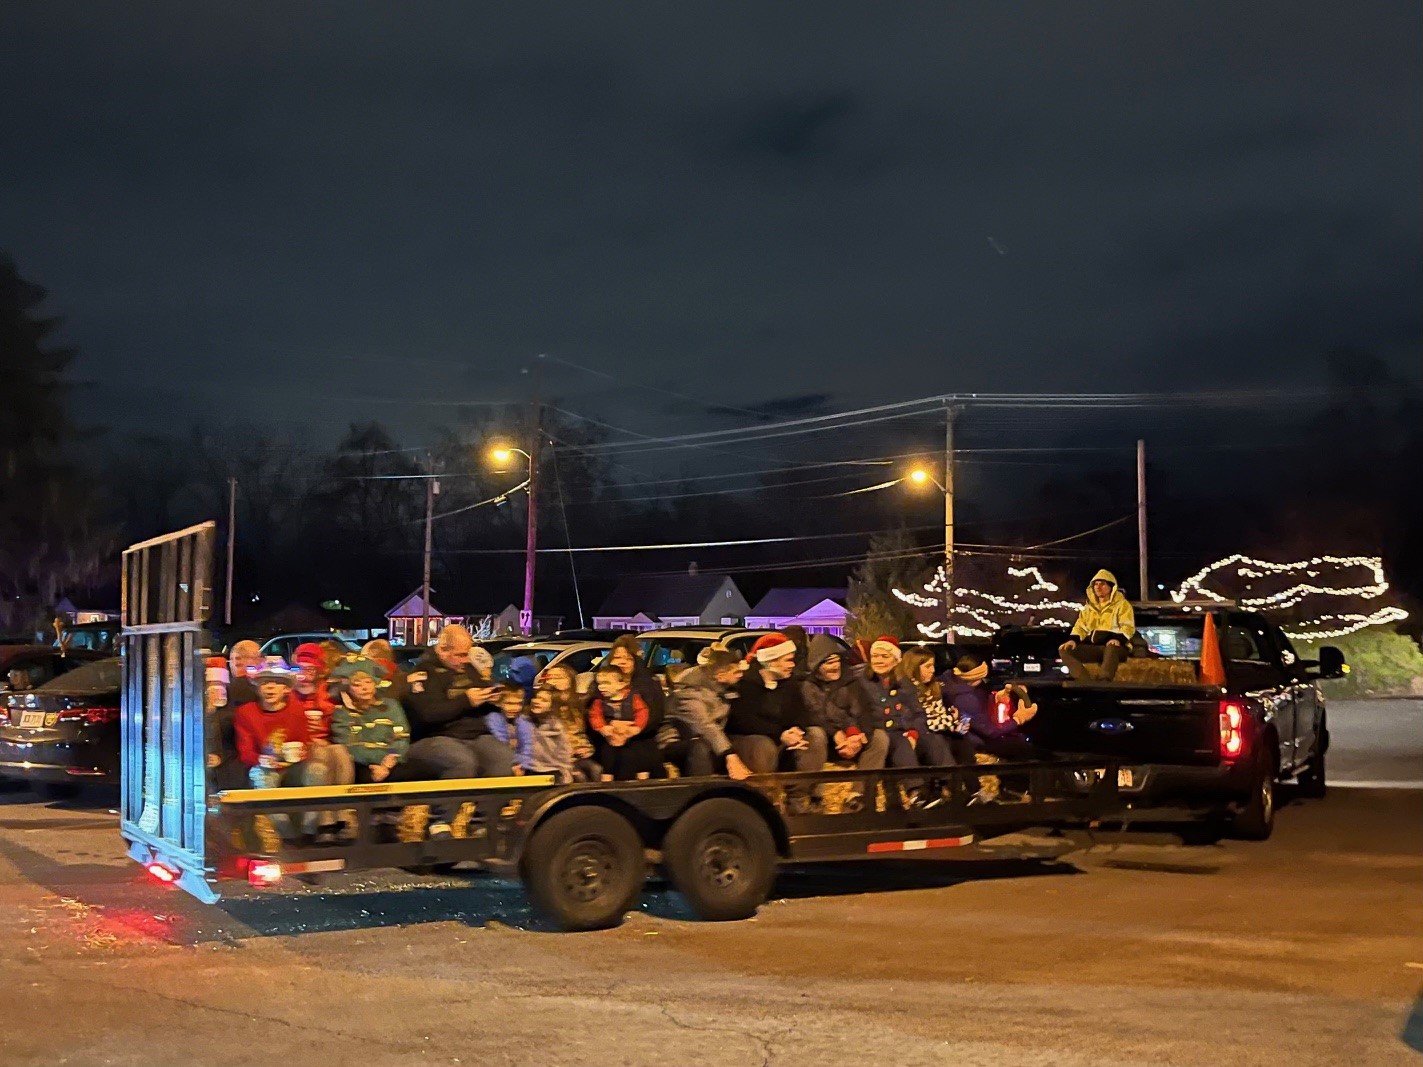 green pickup truck pulling hay ride filled with people